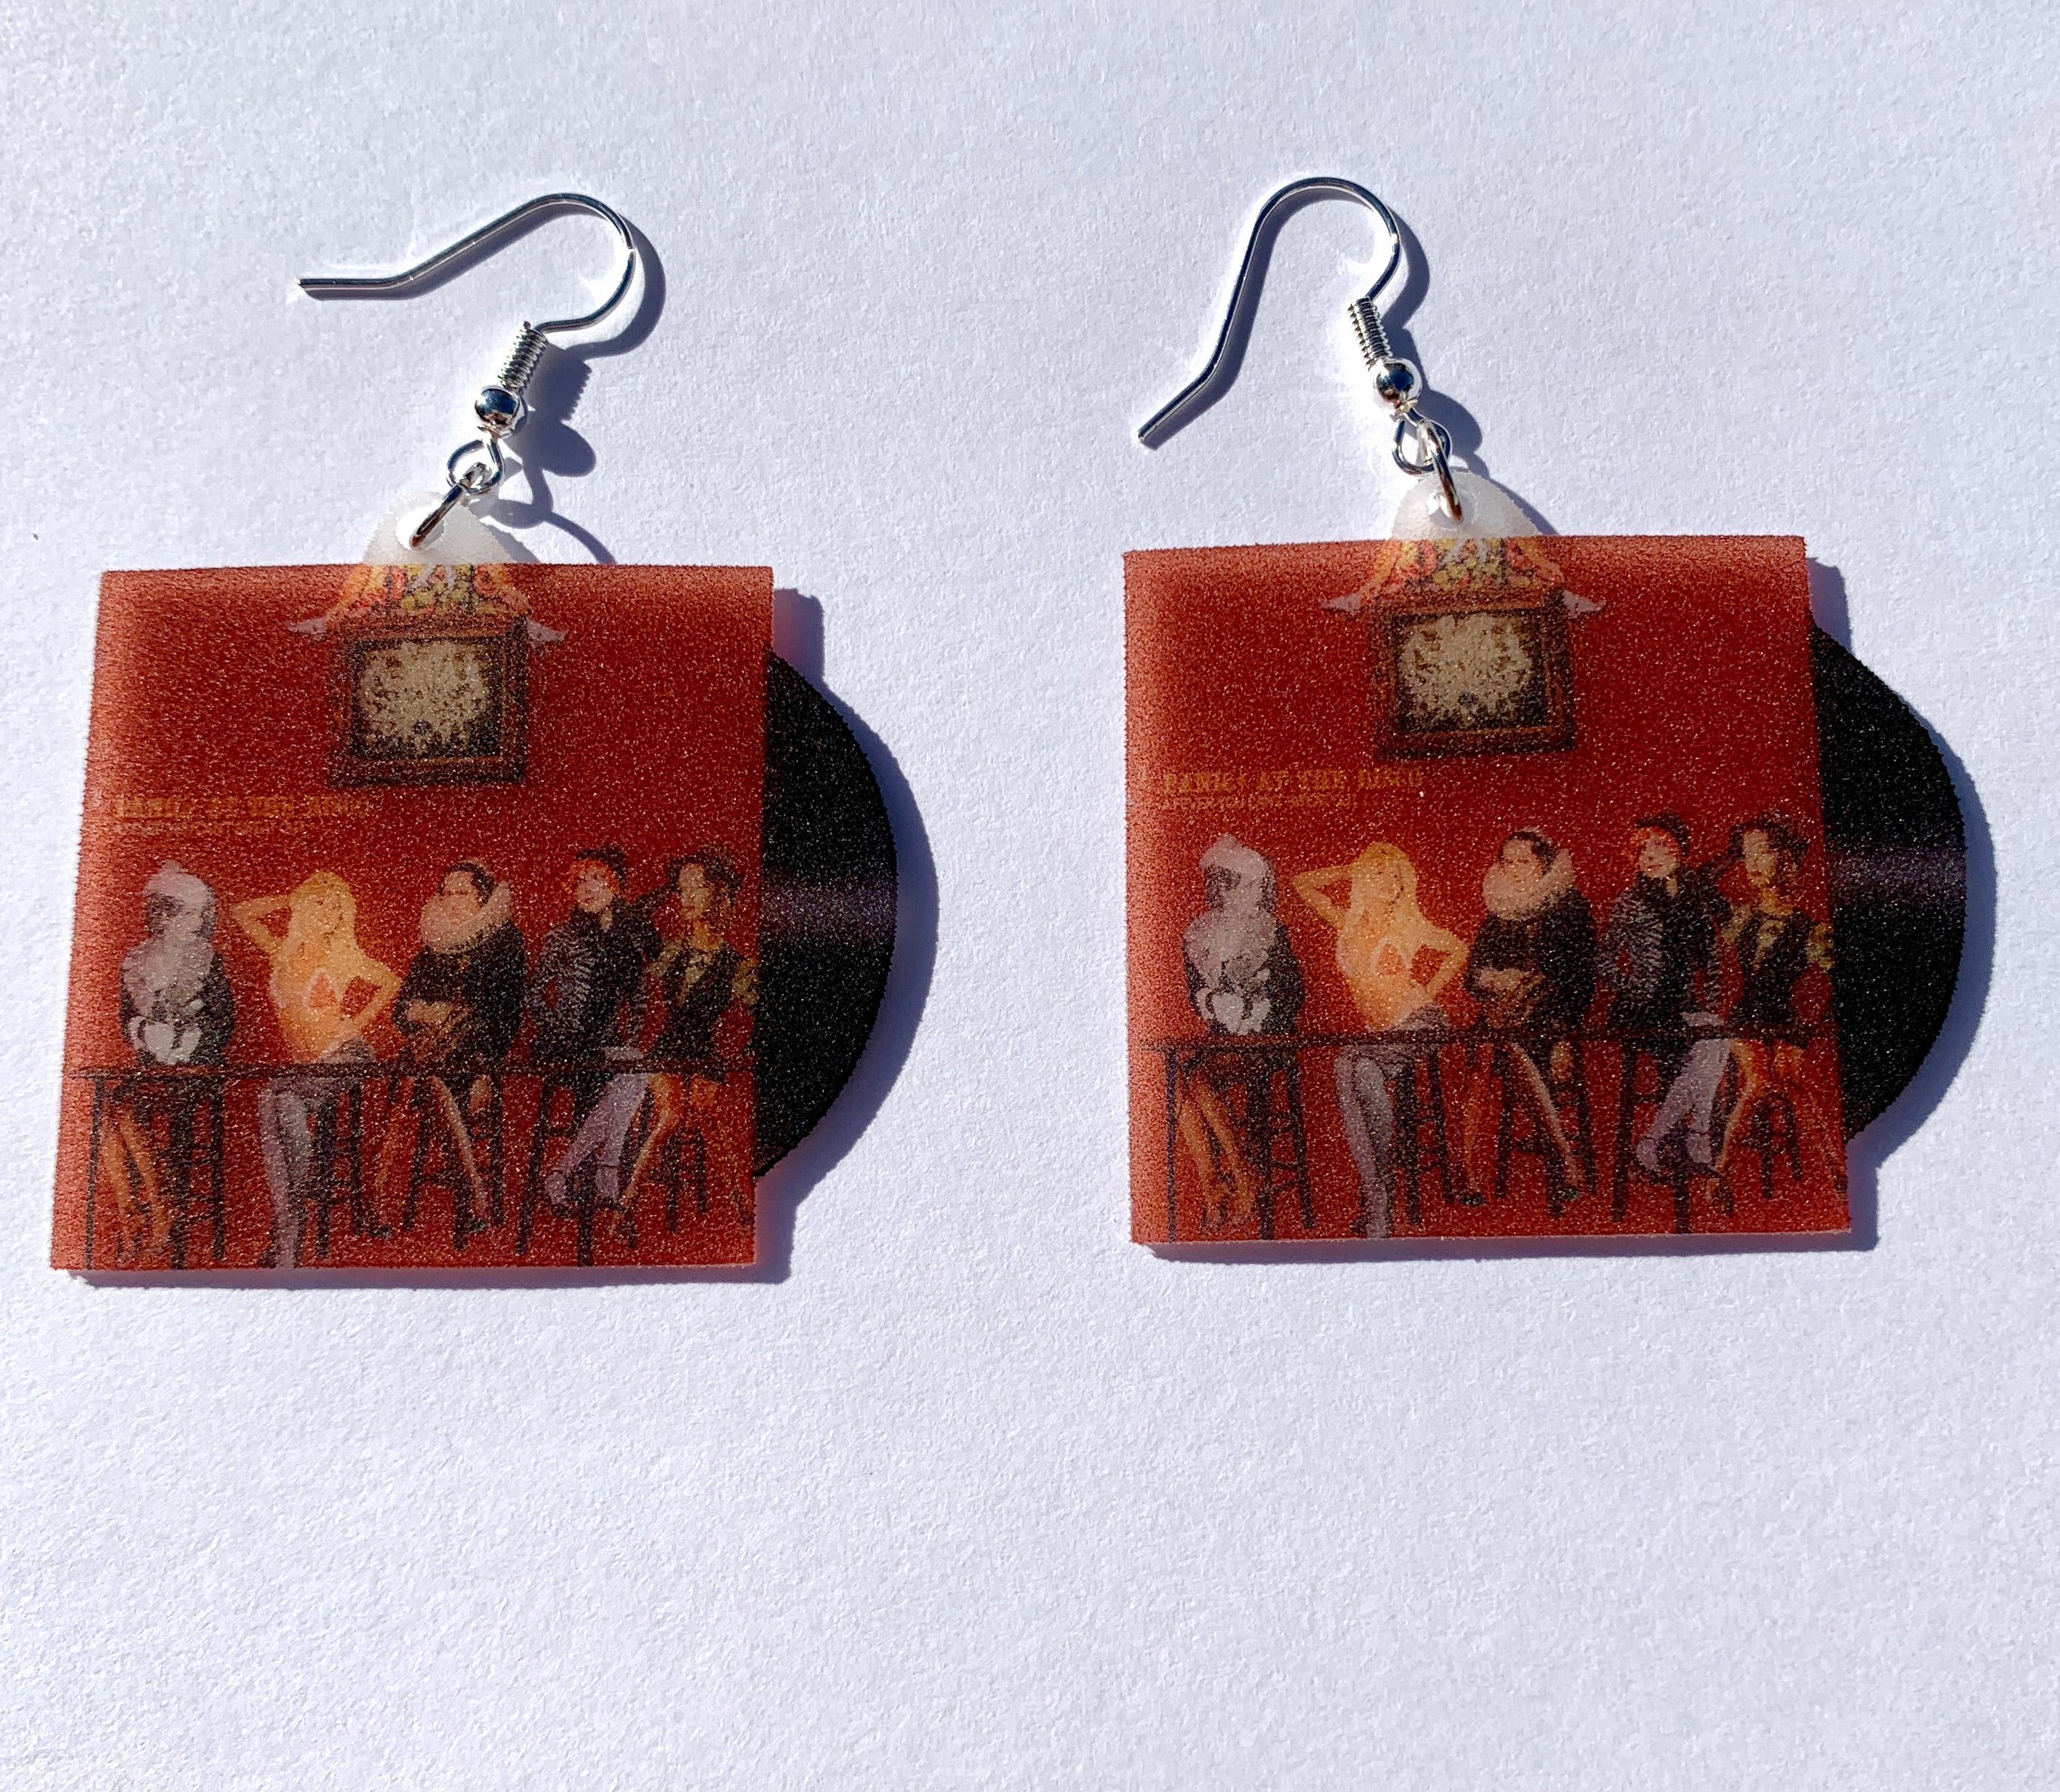 Panic! At The Disco A Fever You Cant Sweat Out Vinyl Album Handmade Earrings!